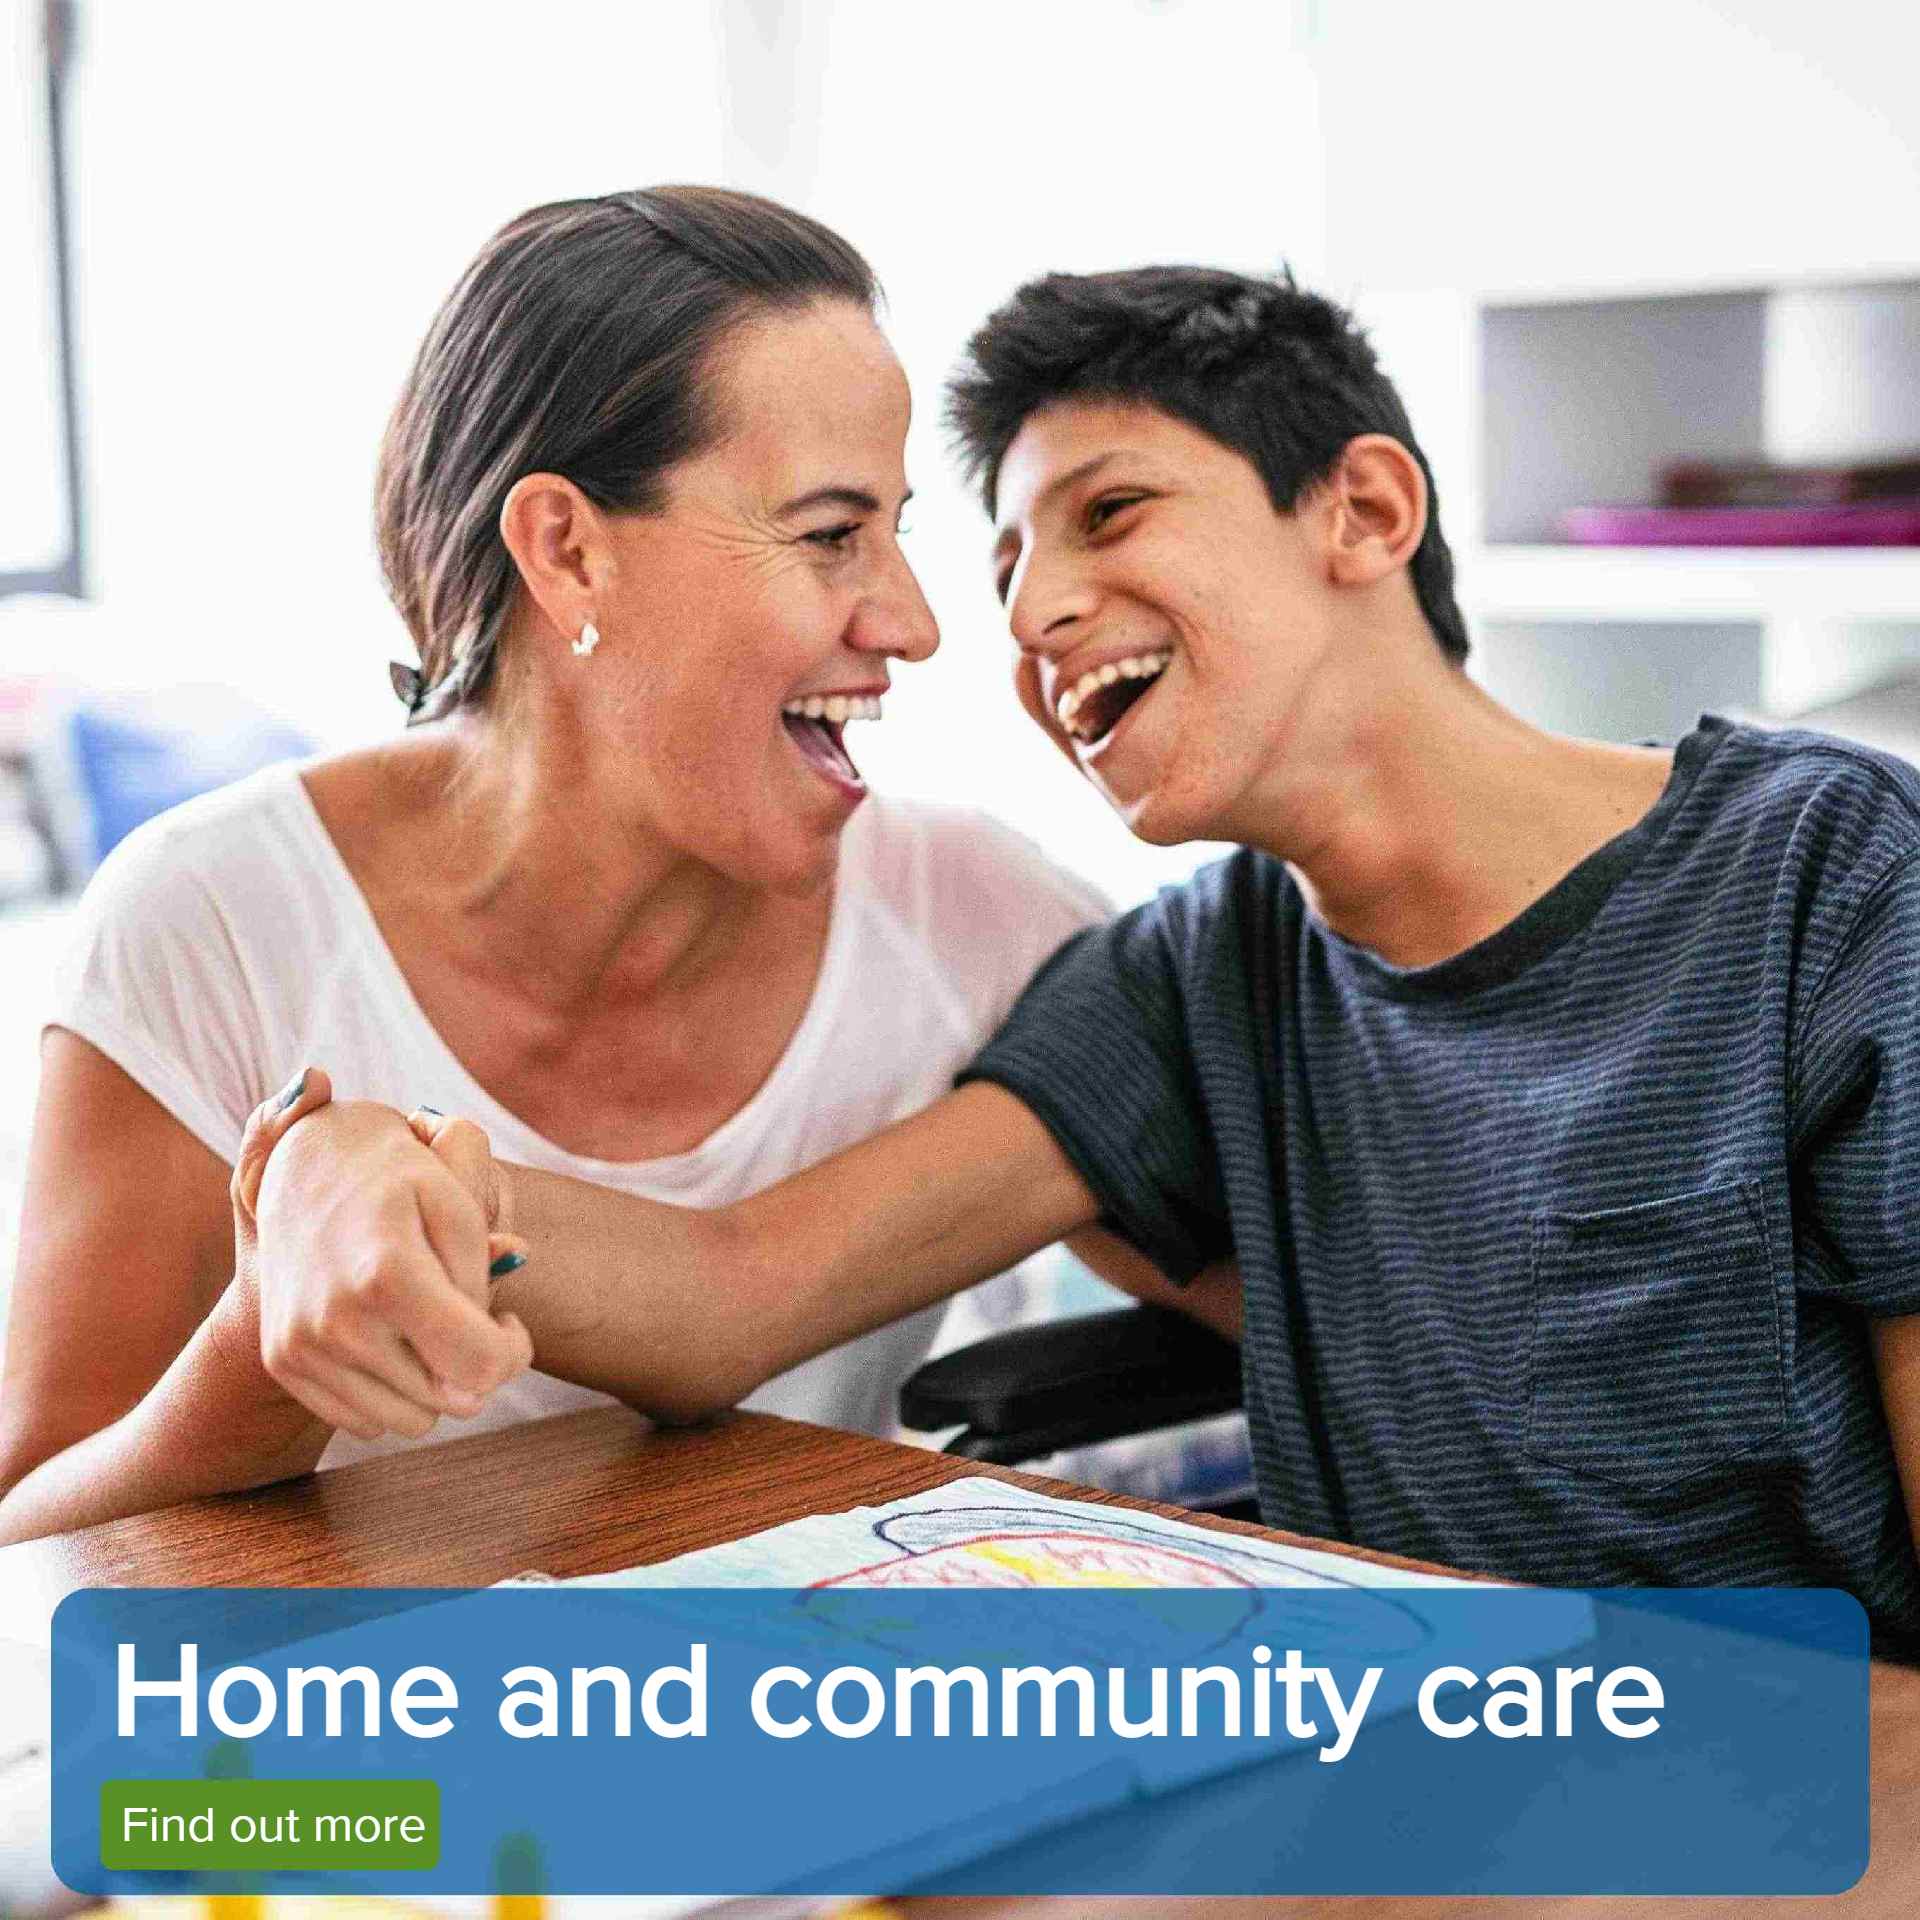 Home and community care